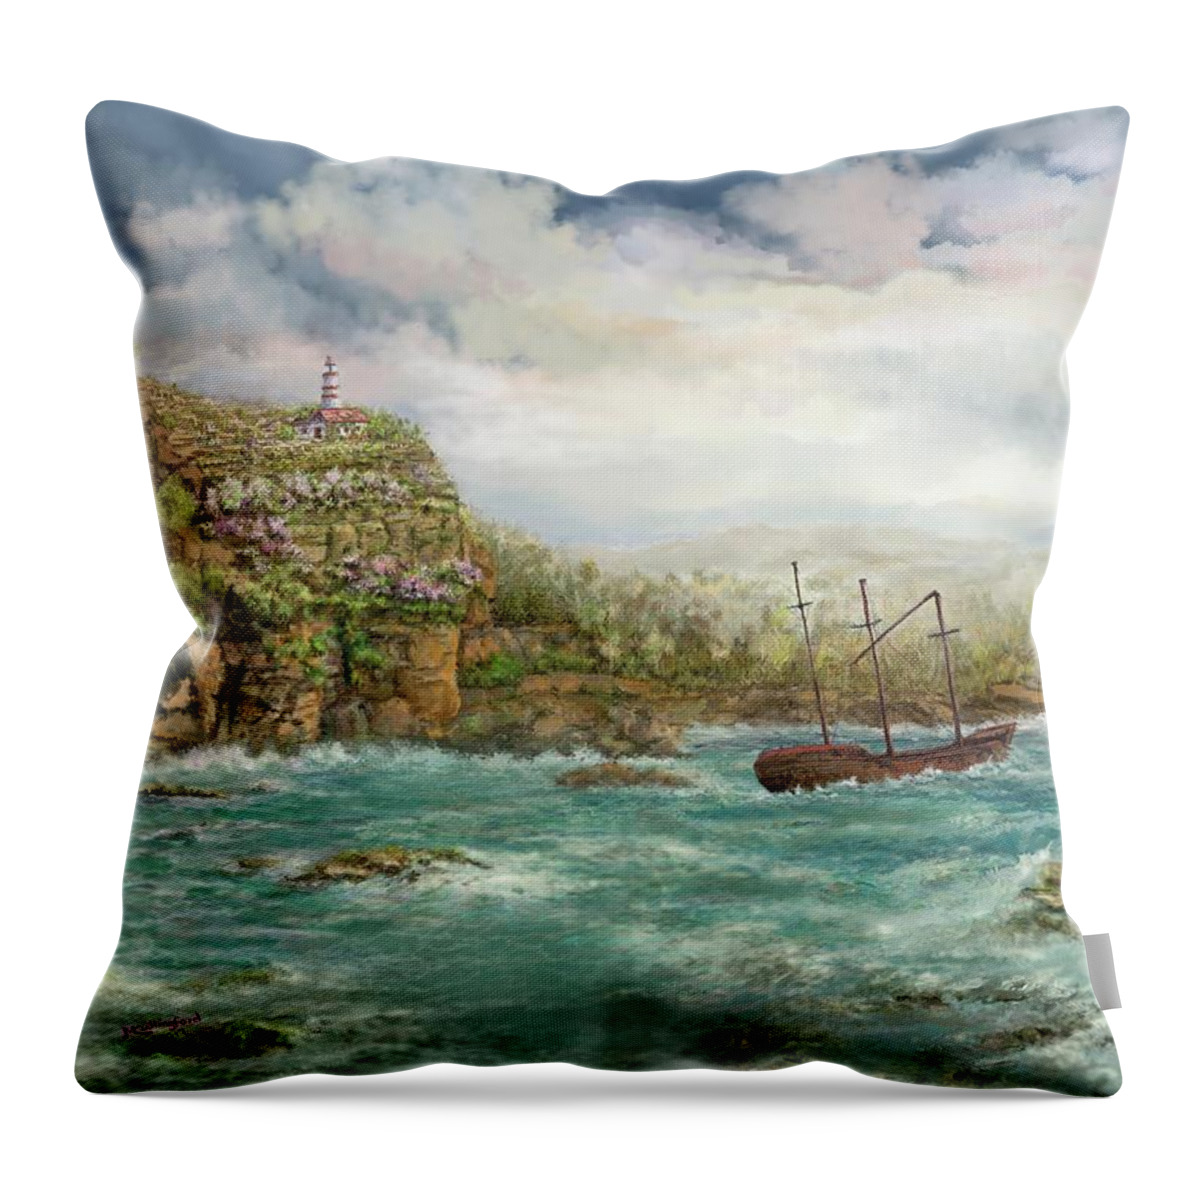 Landscape Throw Pillow featuring the digital art Shipwreck Shoal by Marilyn Cullingford